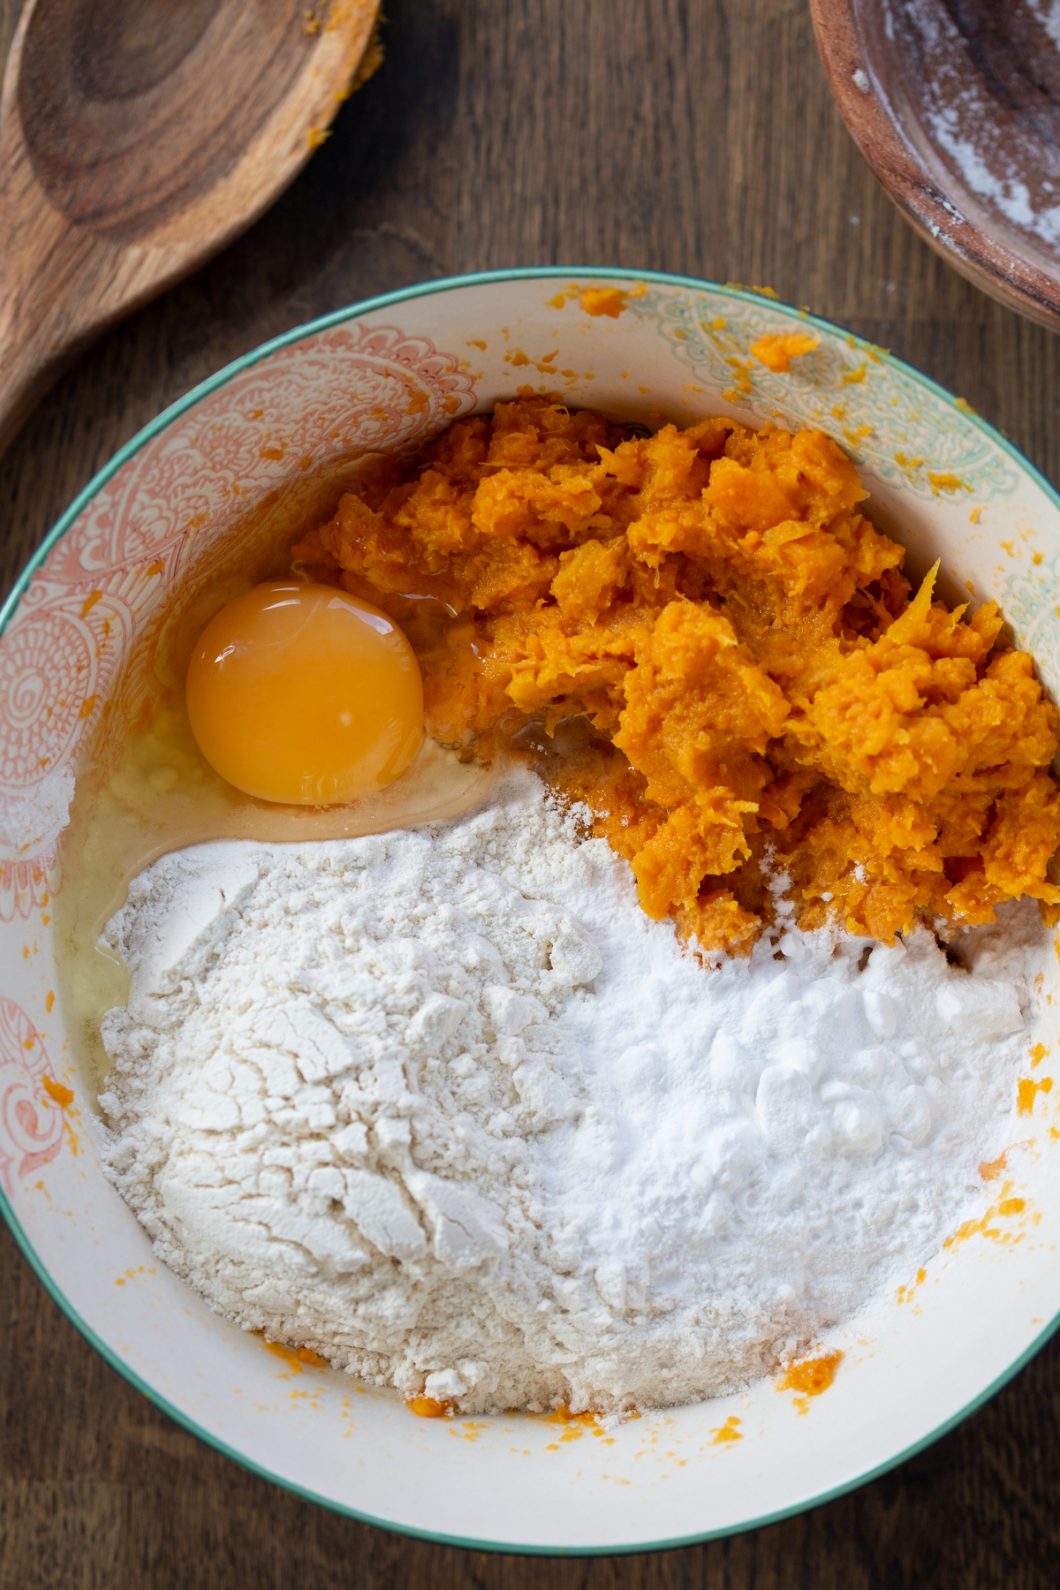 Mashed sweet potatoes in a bowl with flour, starch and egg.